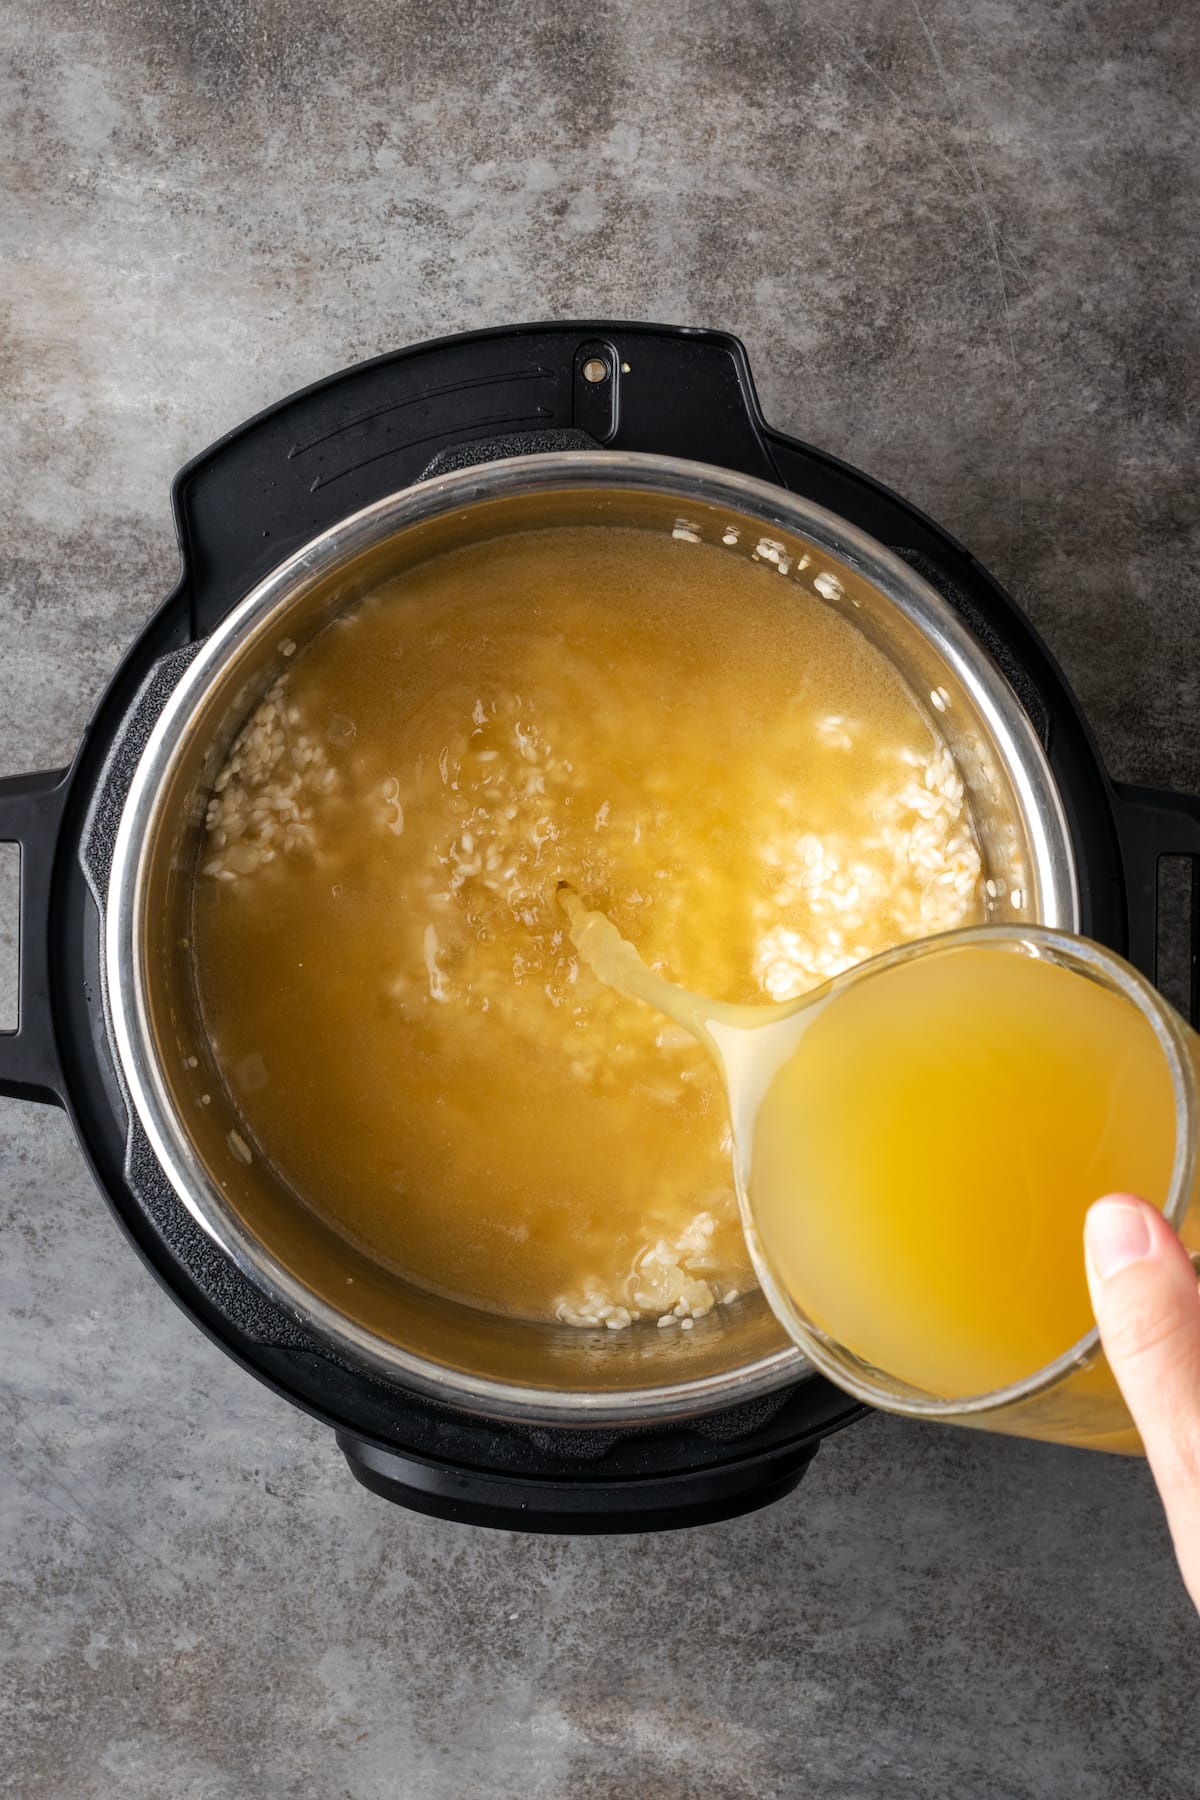 Chicken broth is added to rice in the Instant Pot.